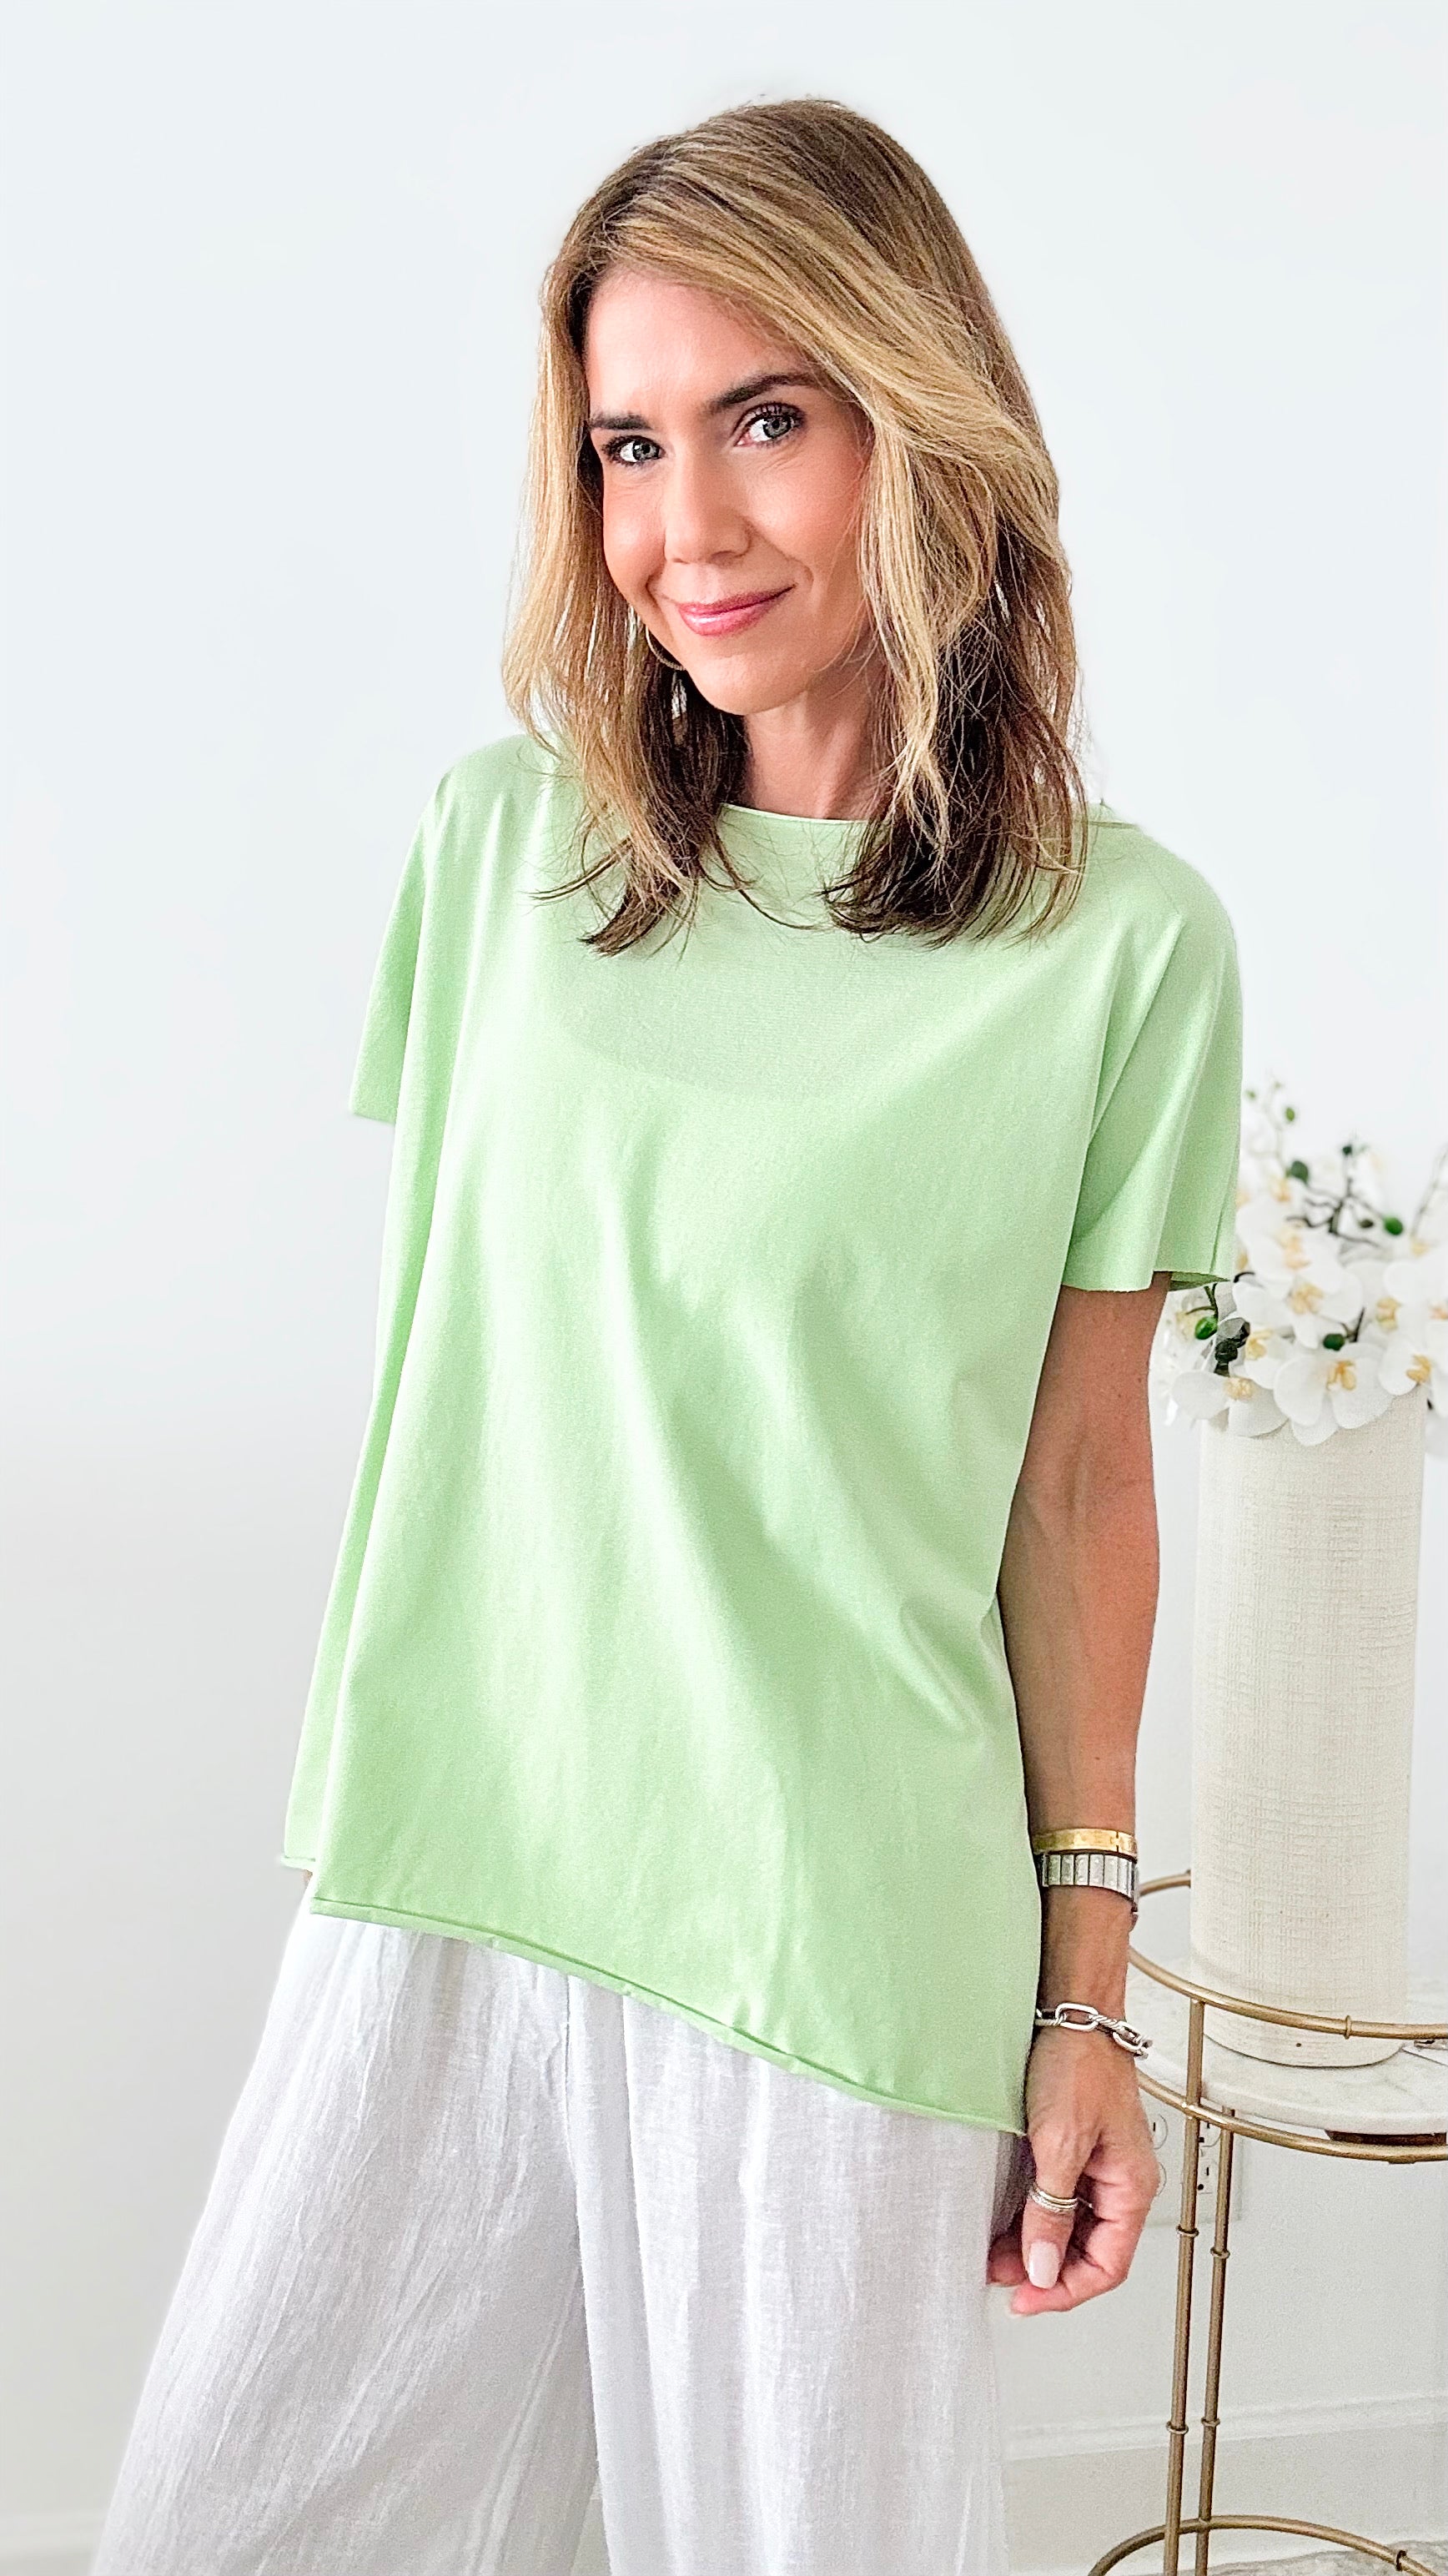 Easy Breezy Italian tee - Lime-110 Short Sleeve Tops-Italianissimo-Coastal Bloom Boutique, find the trendiest versions of the popular styles and looks Located in Indialantic, FL